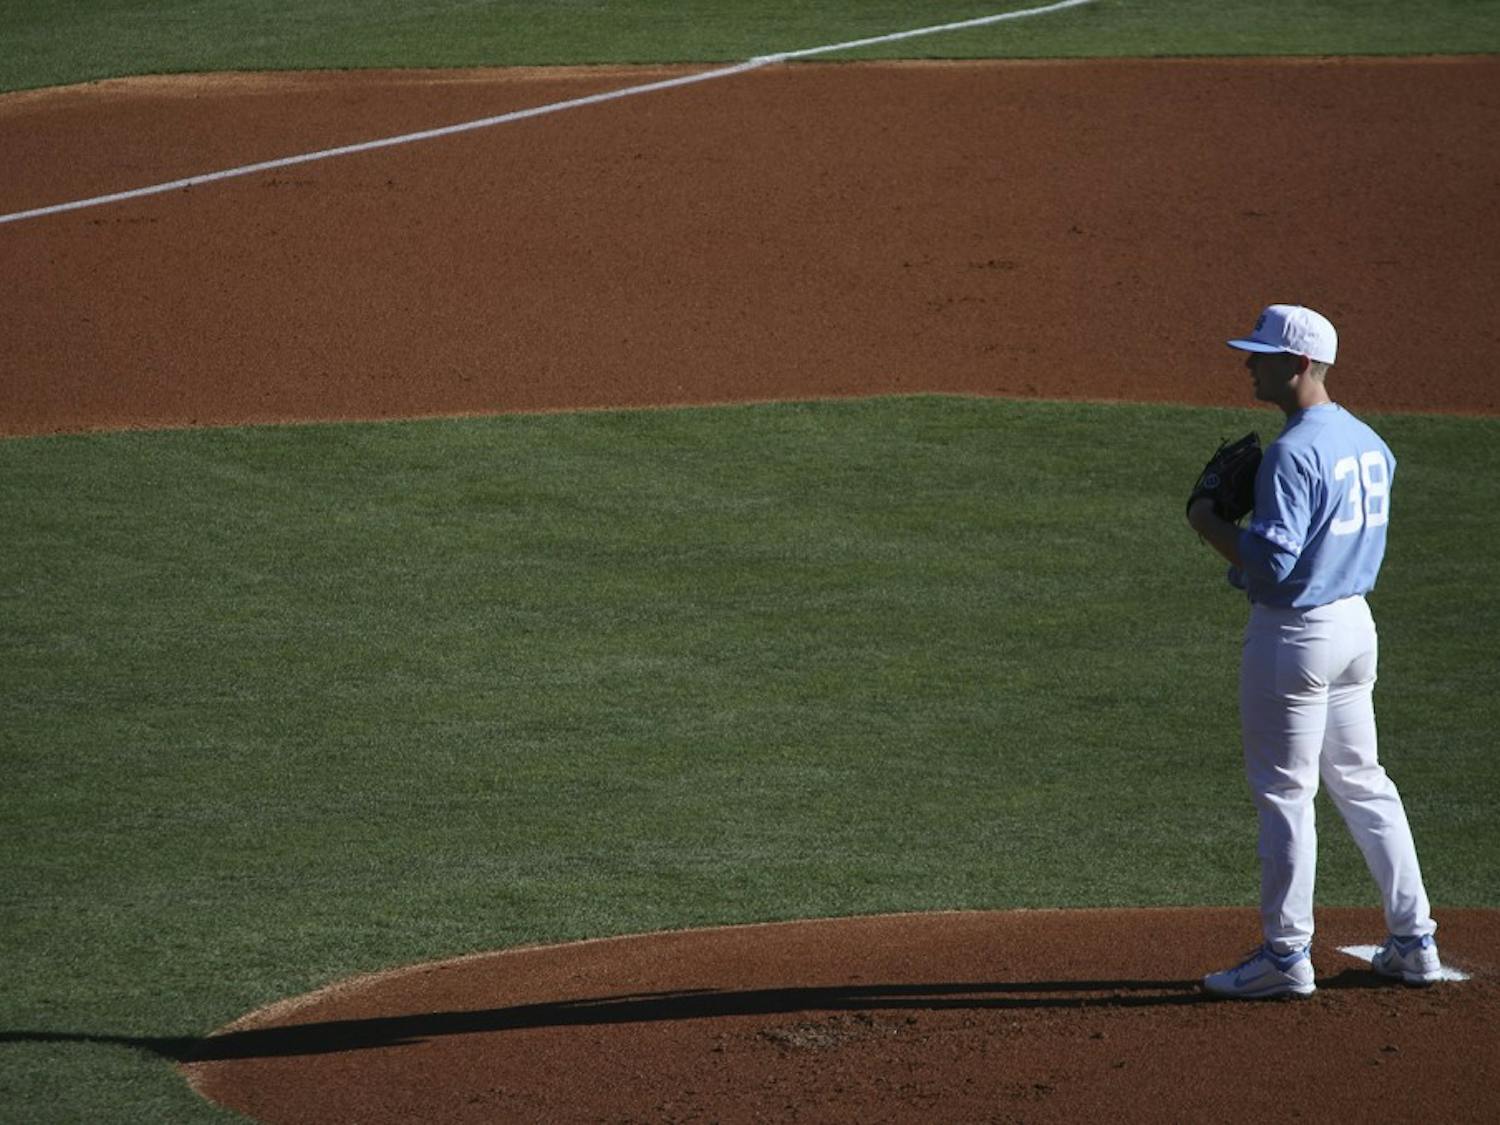 North Carolina pitcher J.B. Bukaukas&nbsp;(38) prepares to throw out the season&nbsp;opening pitch against Kentucky on February 17.